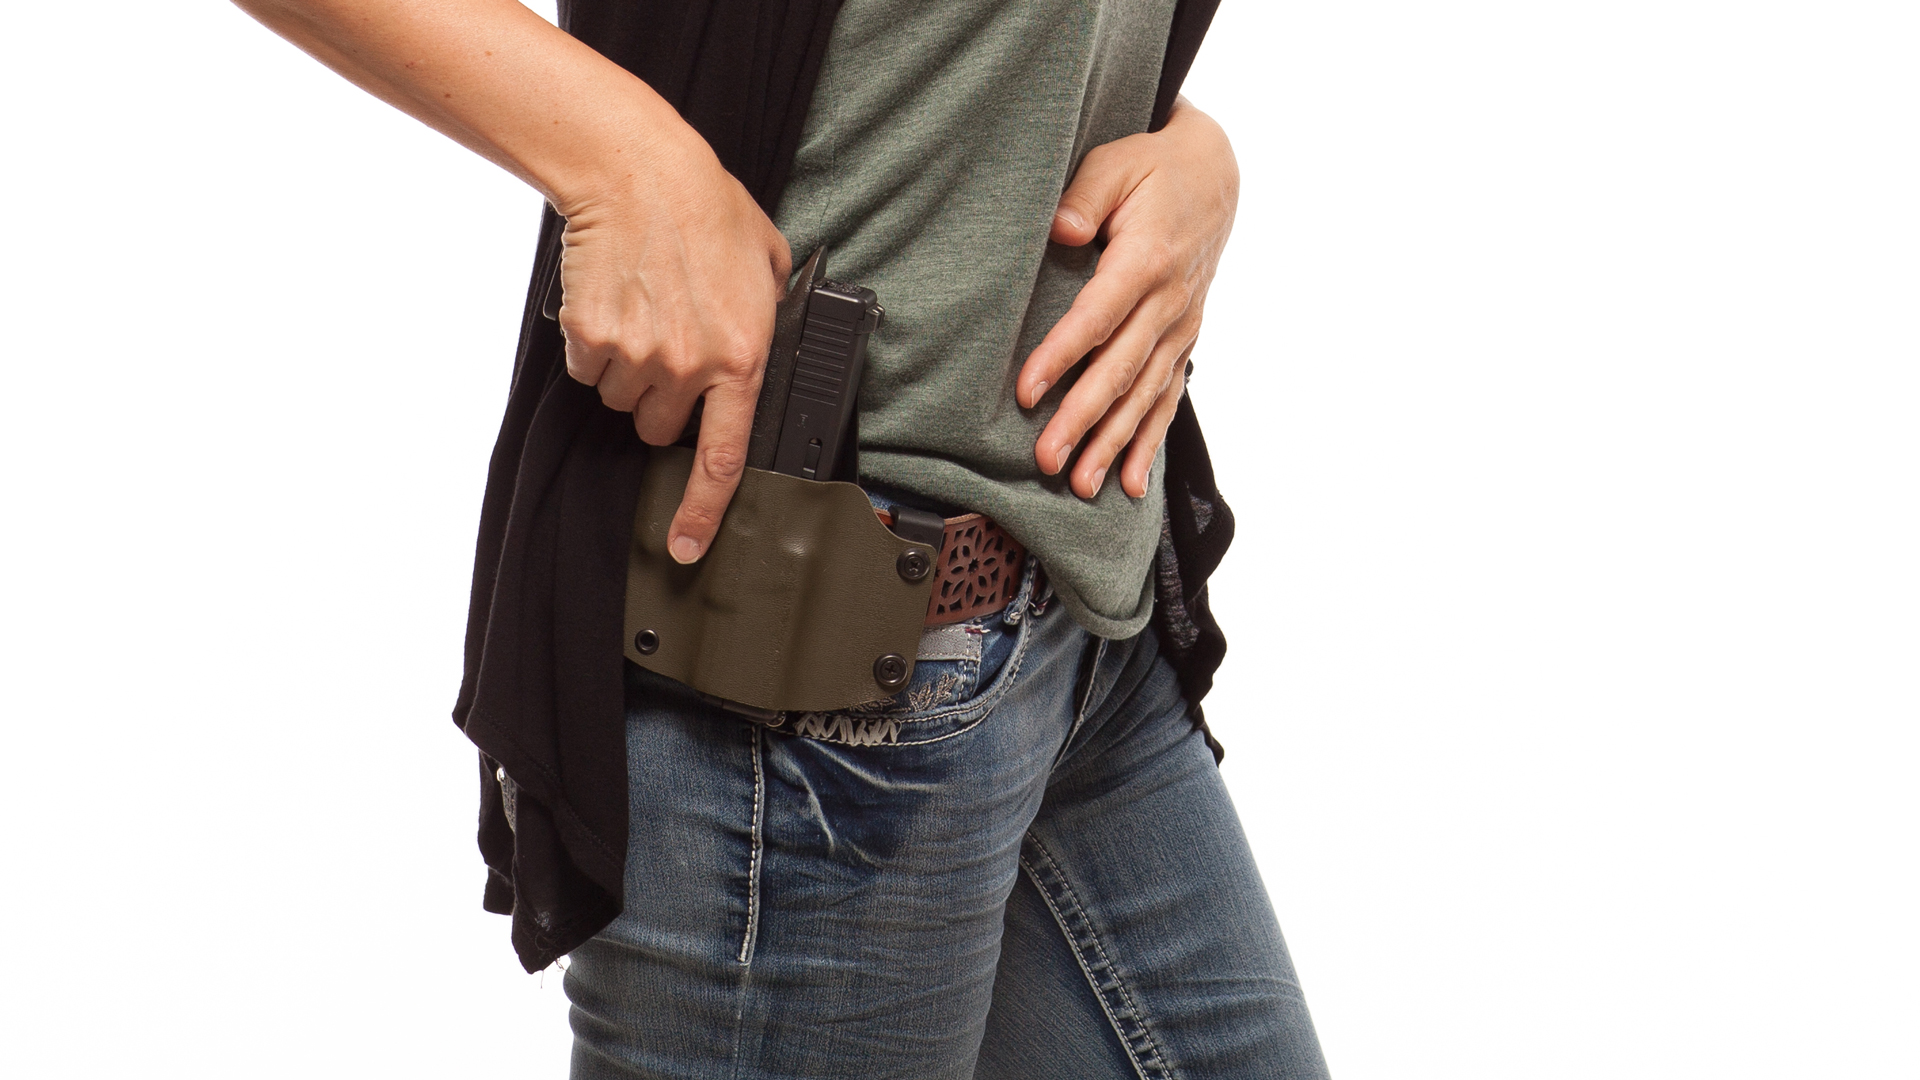 https://www.nrawomen.com/media/j2whtnor/woman-drawing-from-holster.jpg?anchor=center&mode=crop&width=987&height=551&rnd=132355117977500000&quality=60